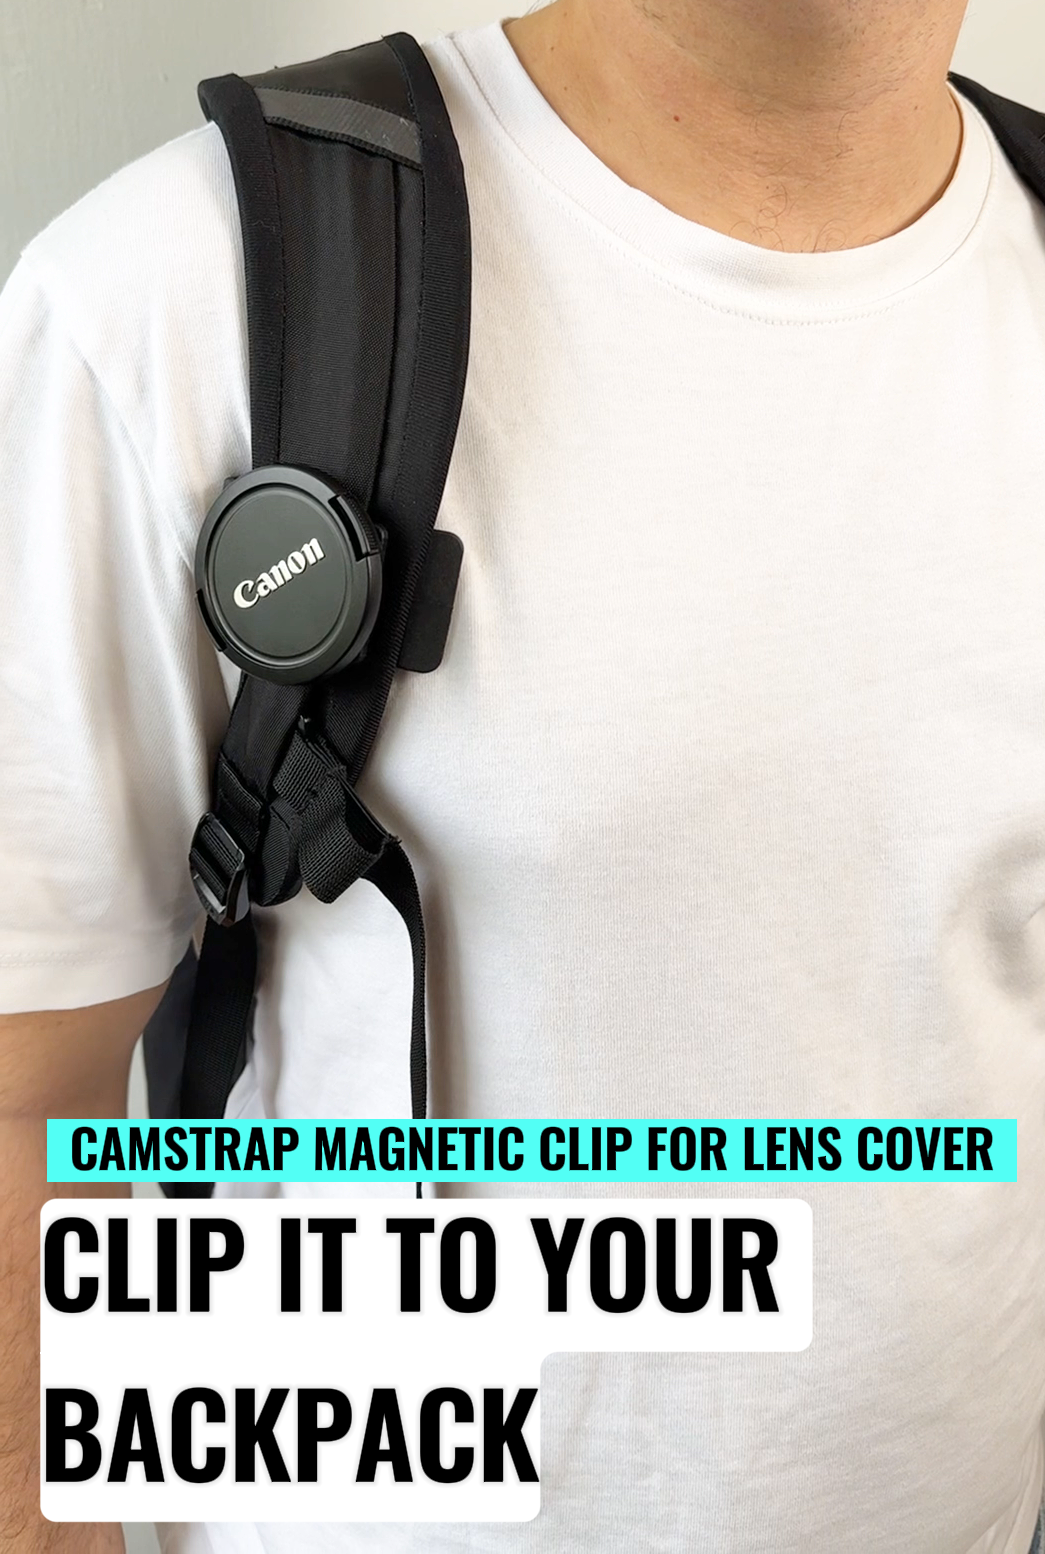 Camstrap Magnetic Clip for Lens Cover